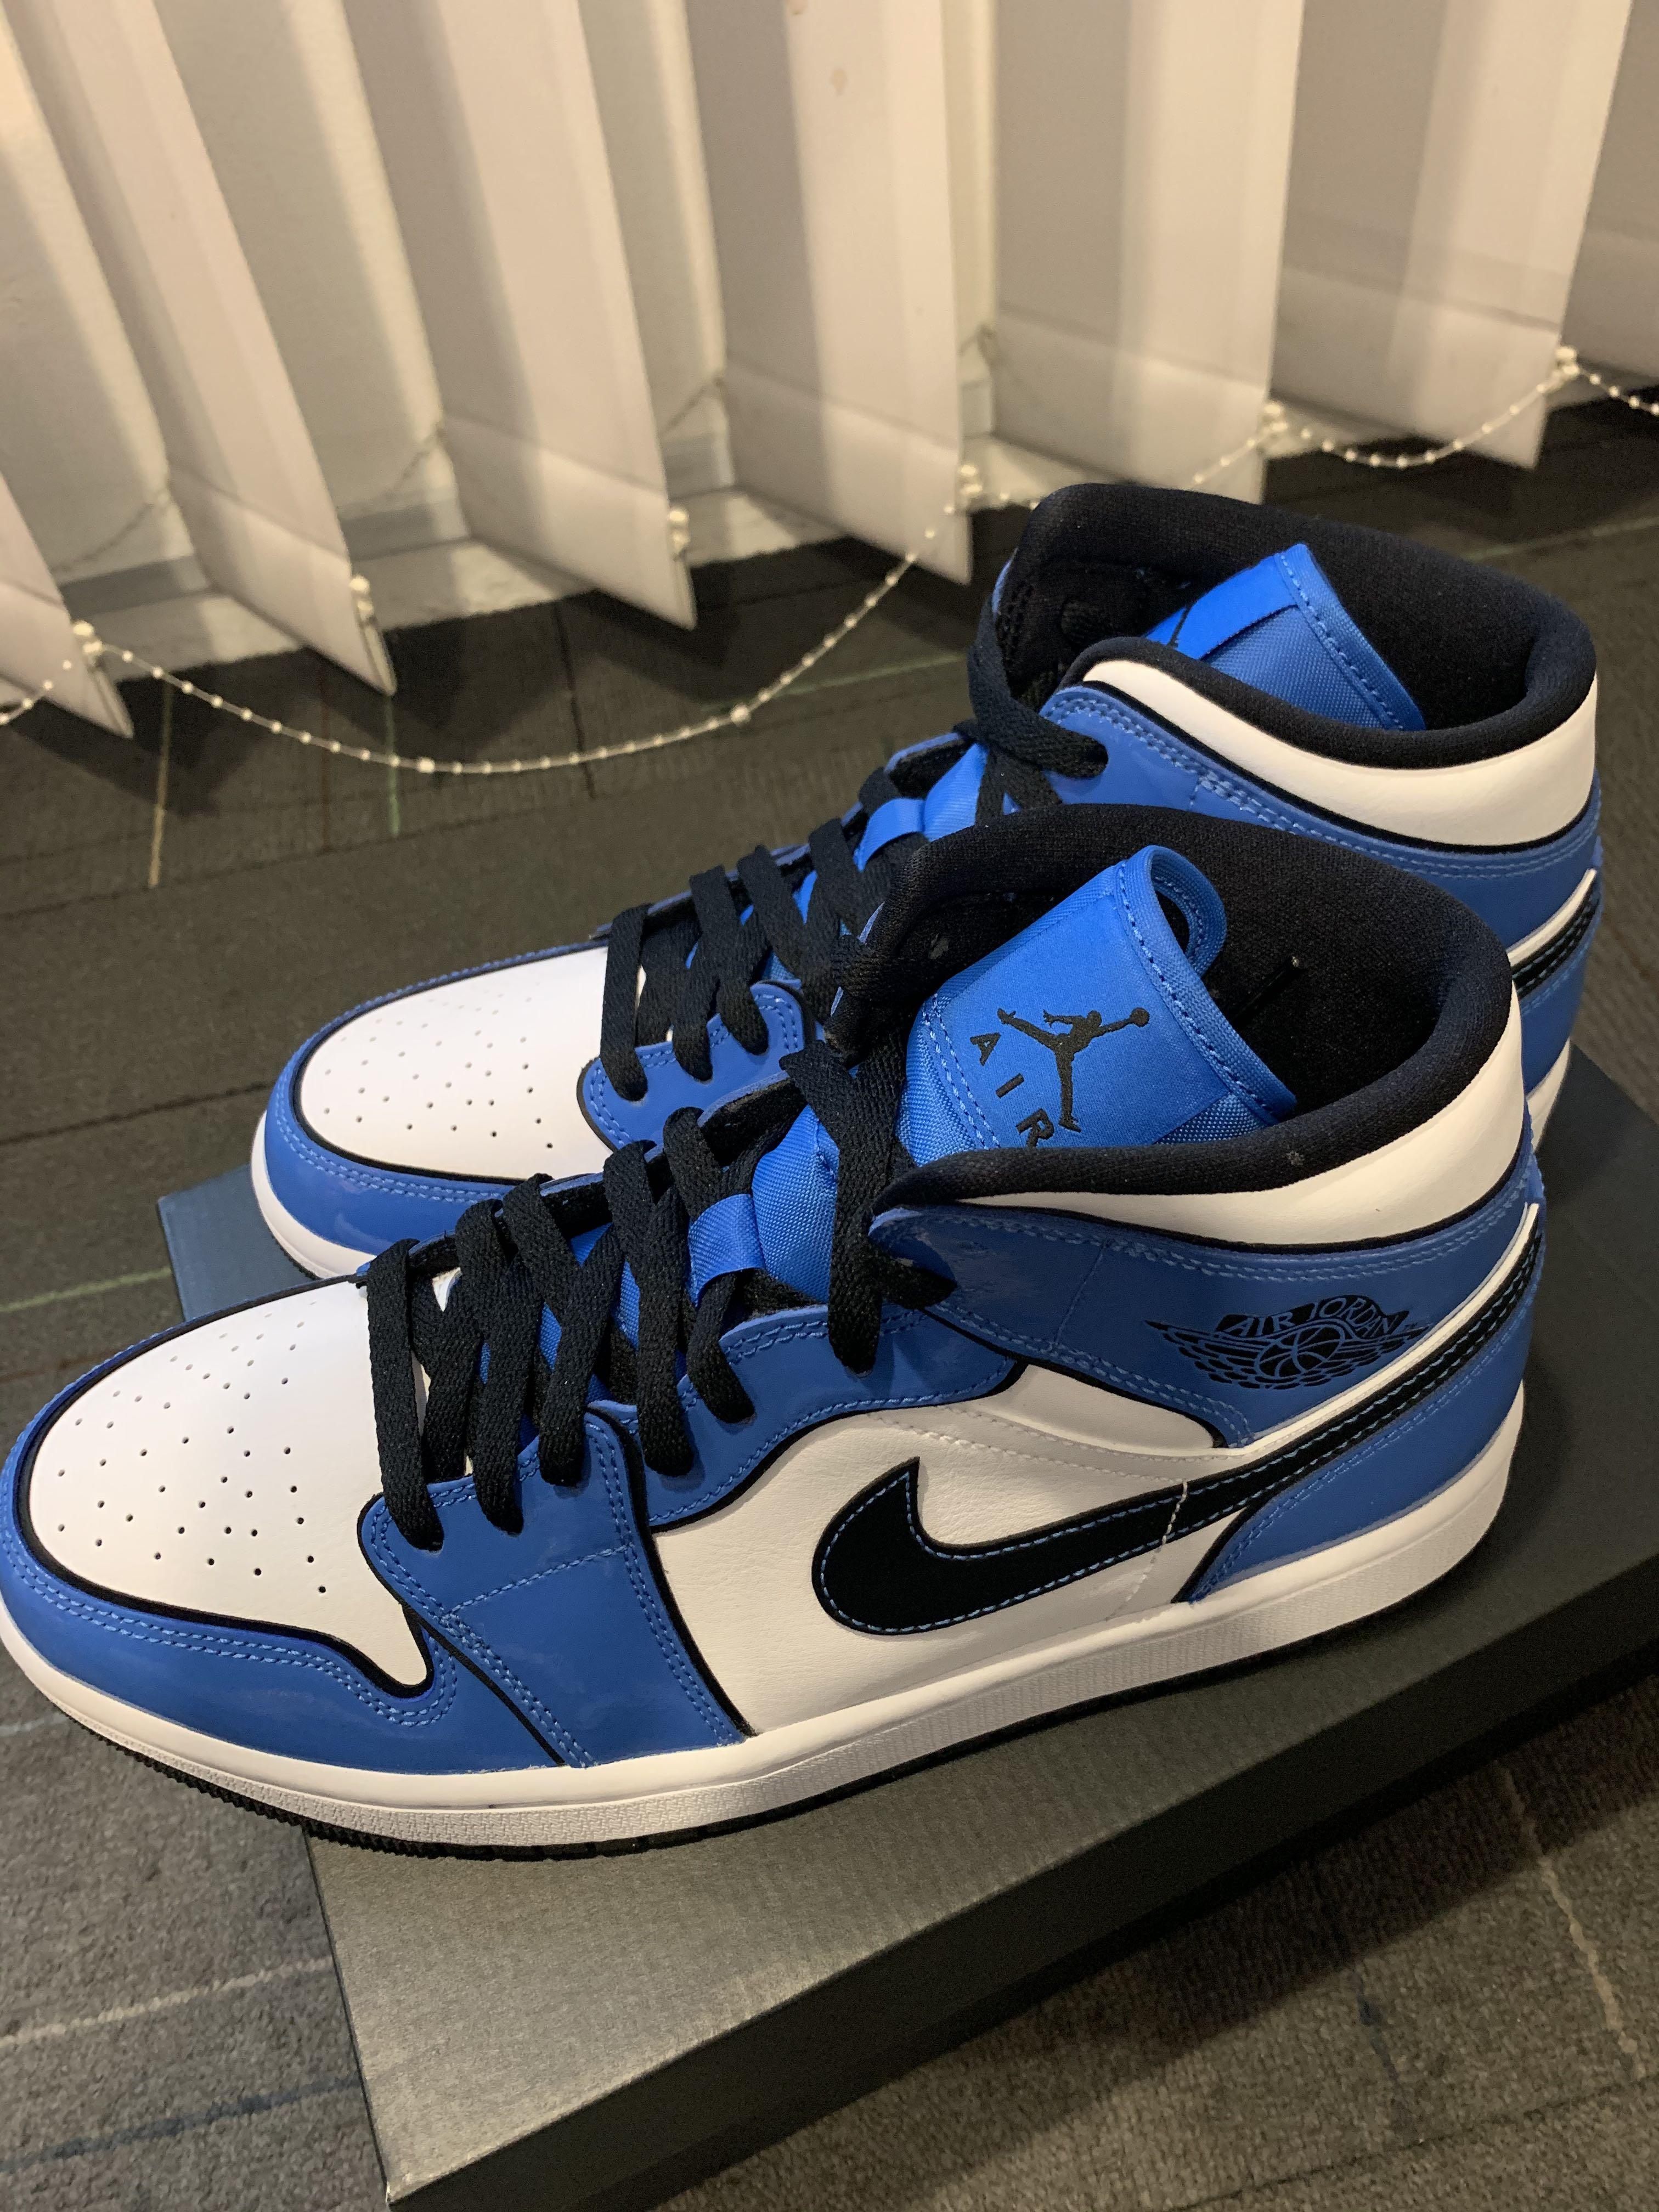 Signal Blue Jordan 1 Outfit For Sale Off 62